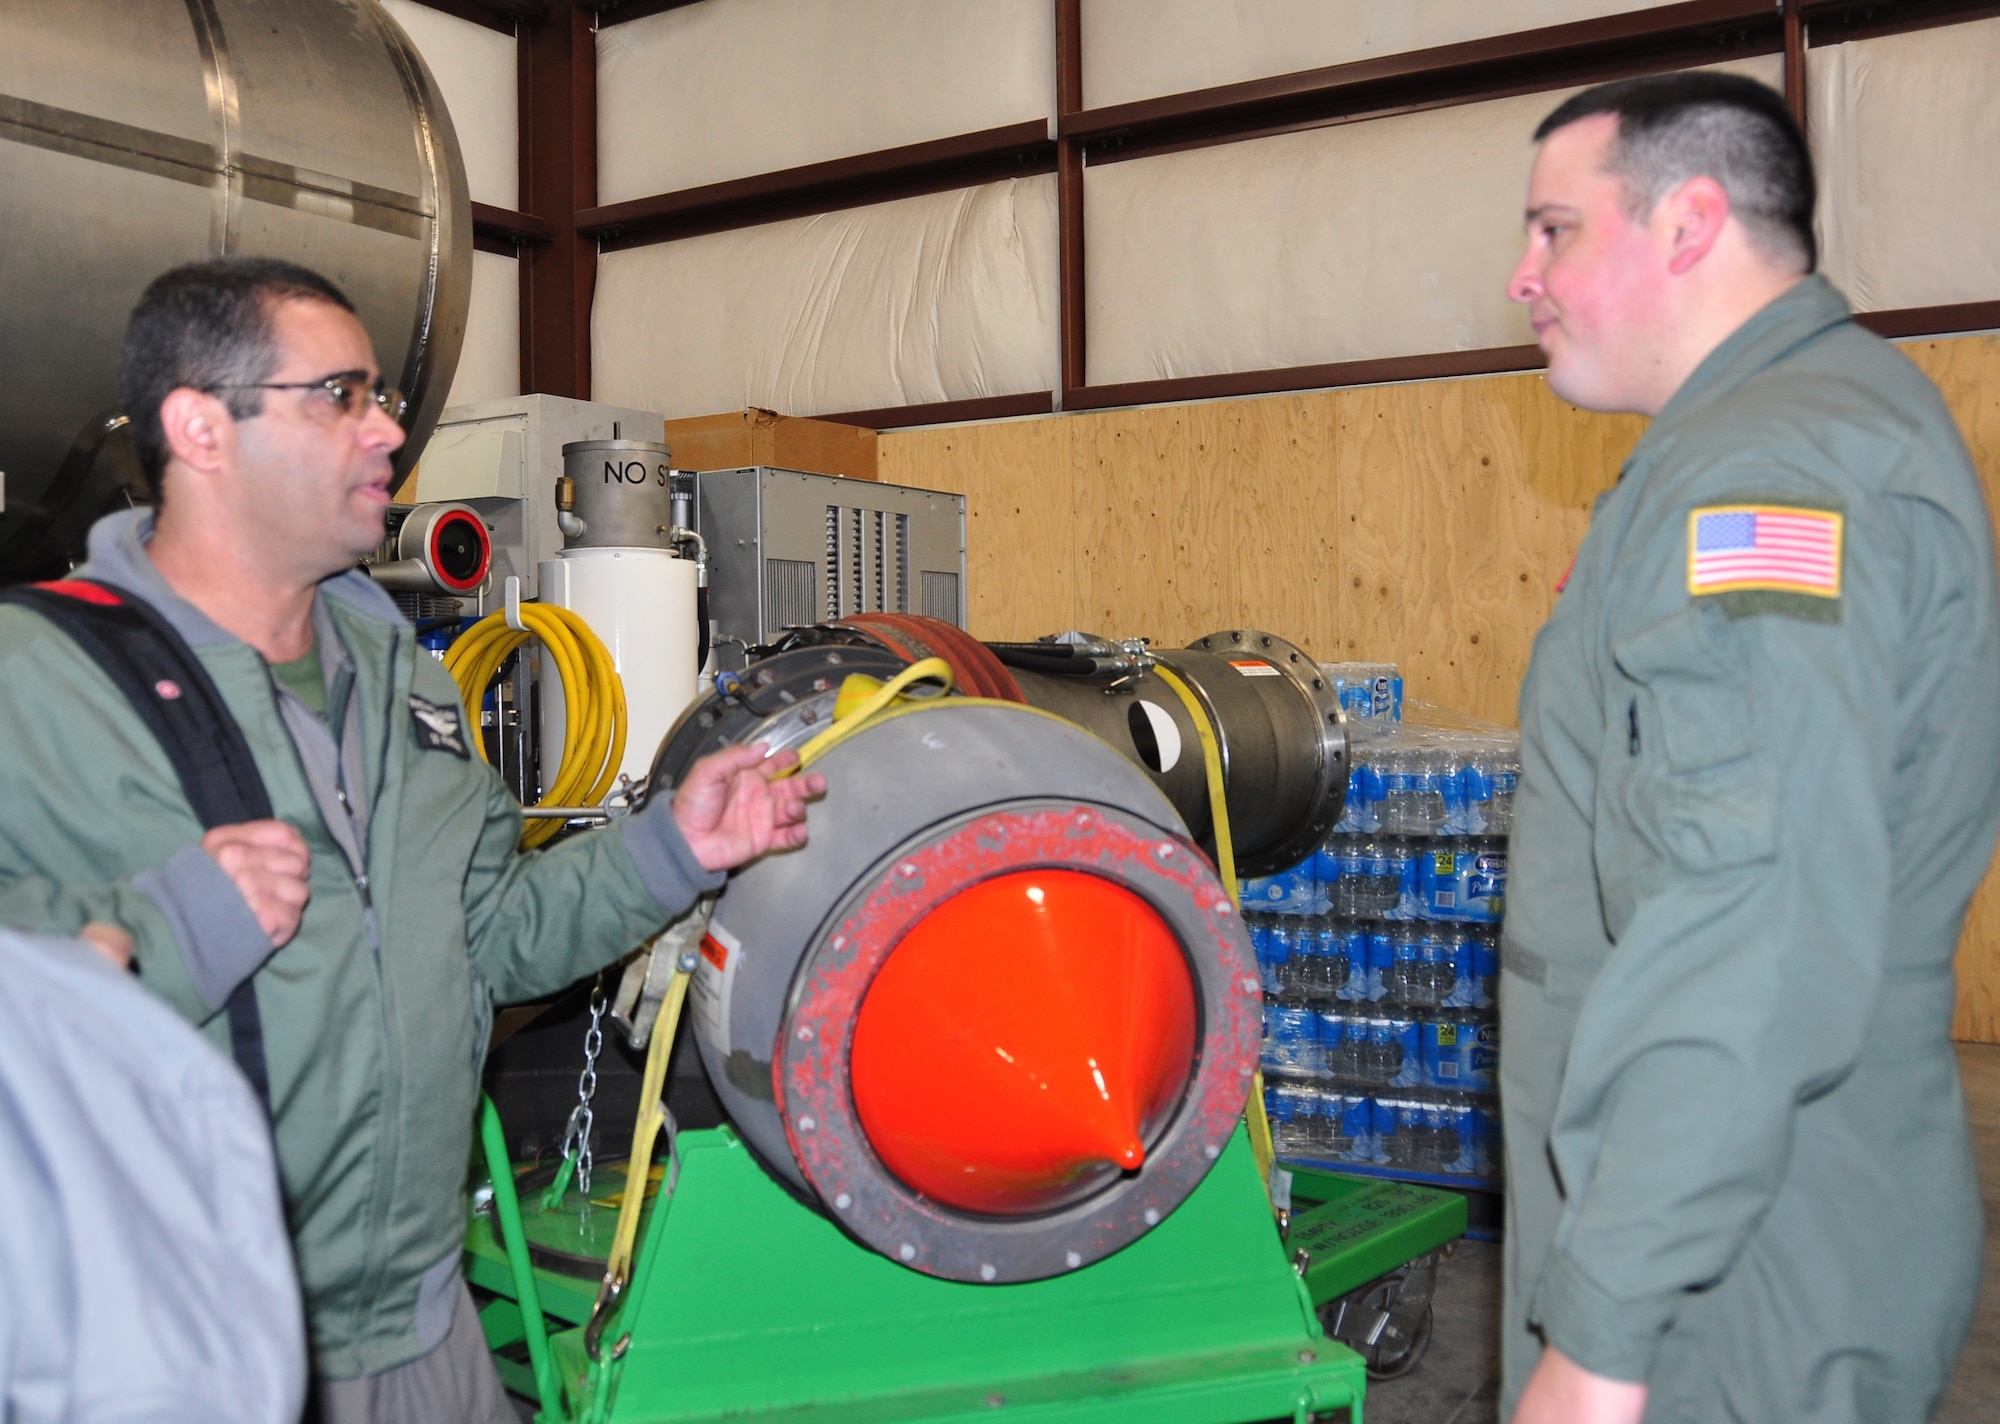 Brazilian Air Force C-130 loadmaster, Master Sgt. Rodrigo Pardini (left) asks Master Sgt. Jason Harvey, 302nd Airlift Wing MAFFS-qualified C-130 loadmaster questions about delivery coverage levels the Modular Airborne Fire Fighting System II nozzle can deliver. Pardini and three members of the Brazilian Air Force’s 1st Group Troop Transport visited the Air Force Reserve Command’s 302nd AW at Peterson Air Force Base, Colo., Nov. 15, 2012 to learn more about the 302nd AW’s MAFFS program and more specifically, the Air Force Reserve unit’s conversion from the MAFFS legacy system to the MAFFS II system.  The five-day visit included classroom instruction, open dialogue between the two countries’ MAFFS subject matter experts and hands-on tours of the U.S. Forest Service MAFFS II units. The Brazilian Air Force plans to transition to the MAFFS II system in the near future. (U.S. Air Force photo/Ann Skarban)